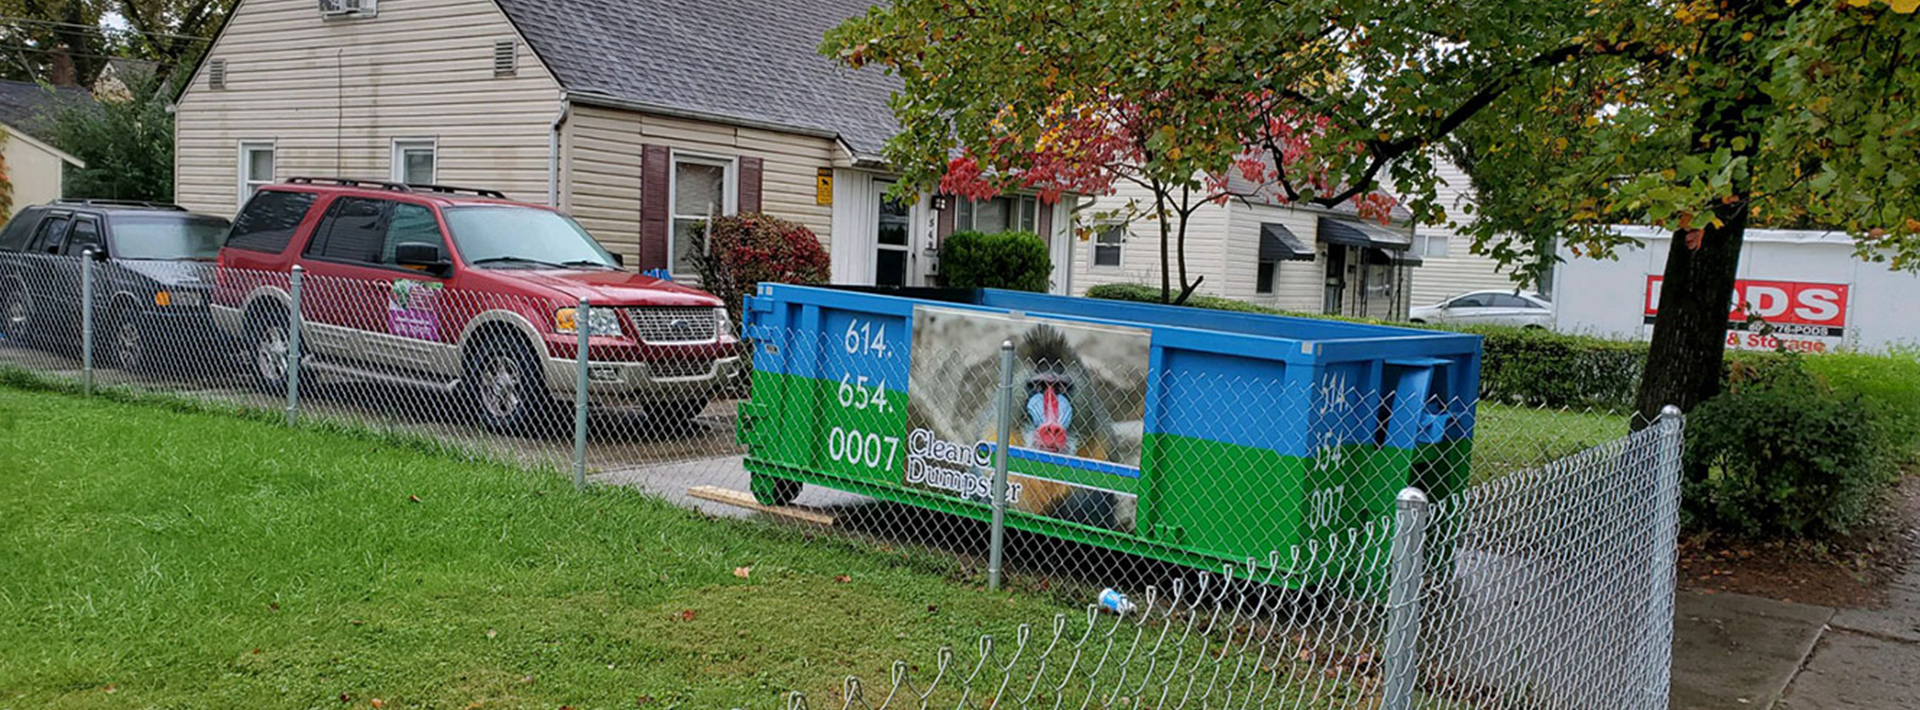 Explore the Residential, Commercial Dumpster Rental and Waste Management work done by CleanE Dumpster in Columbus